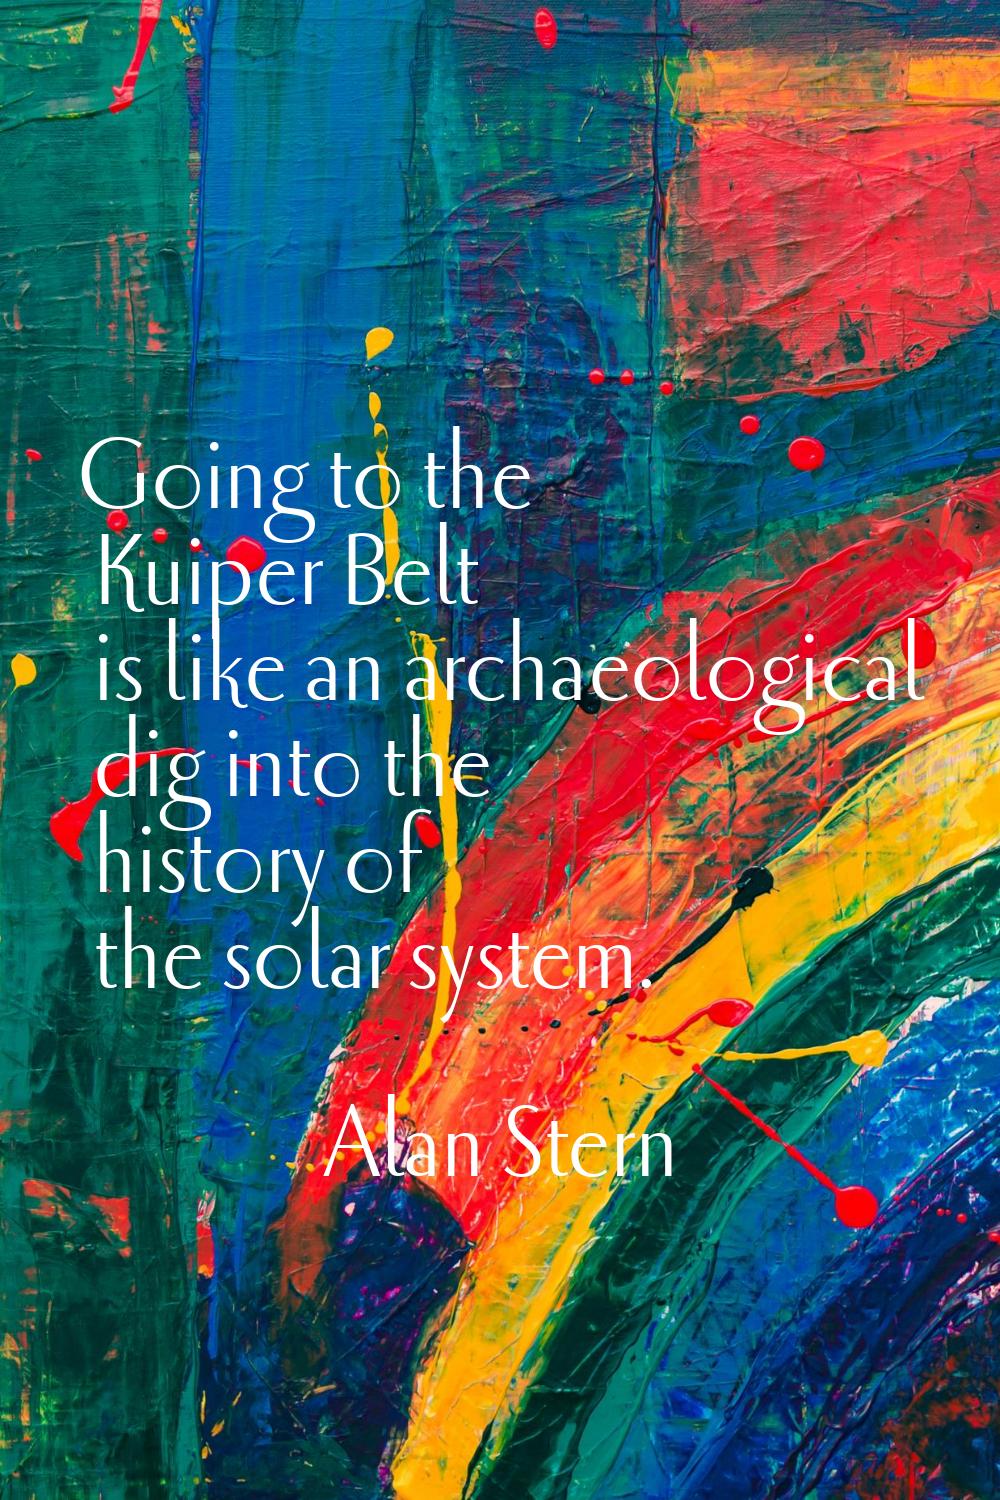 Going to the Kuiper Belt is like an archaeological dig into the history of the solar system.